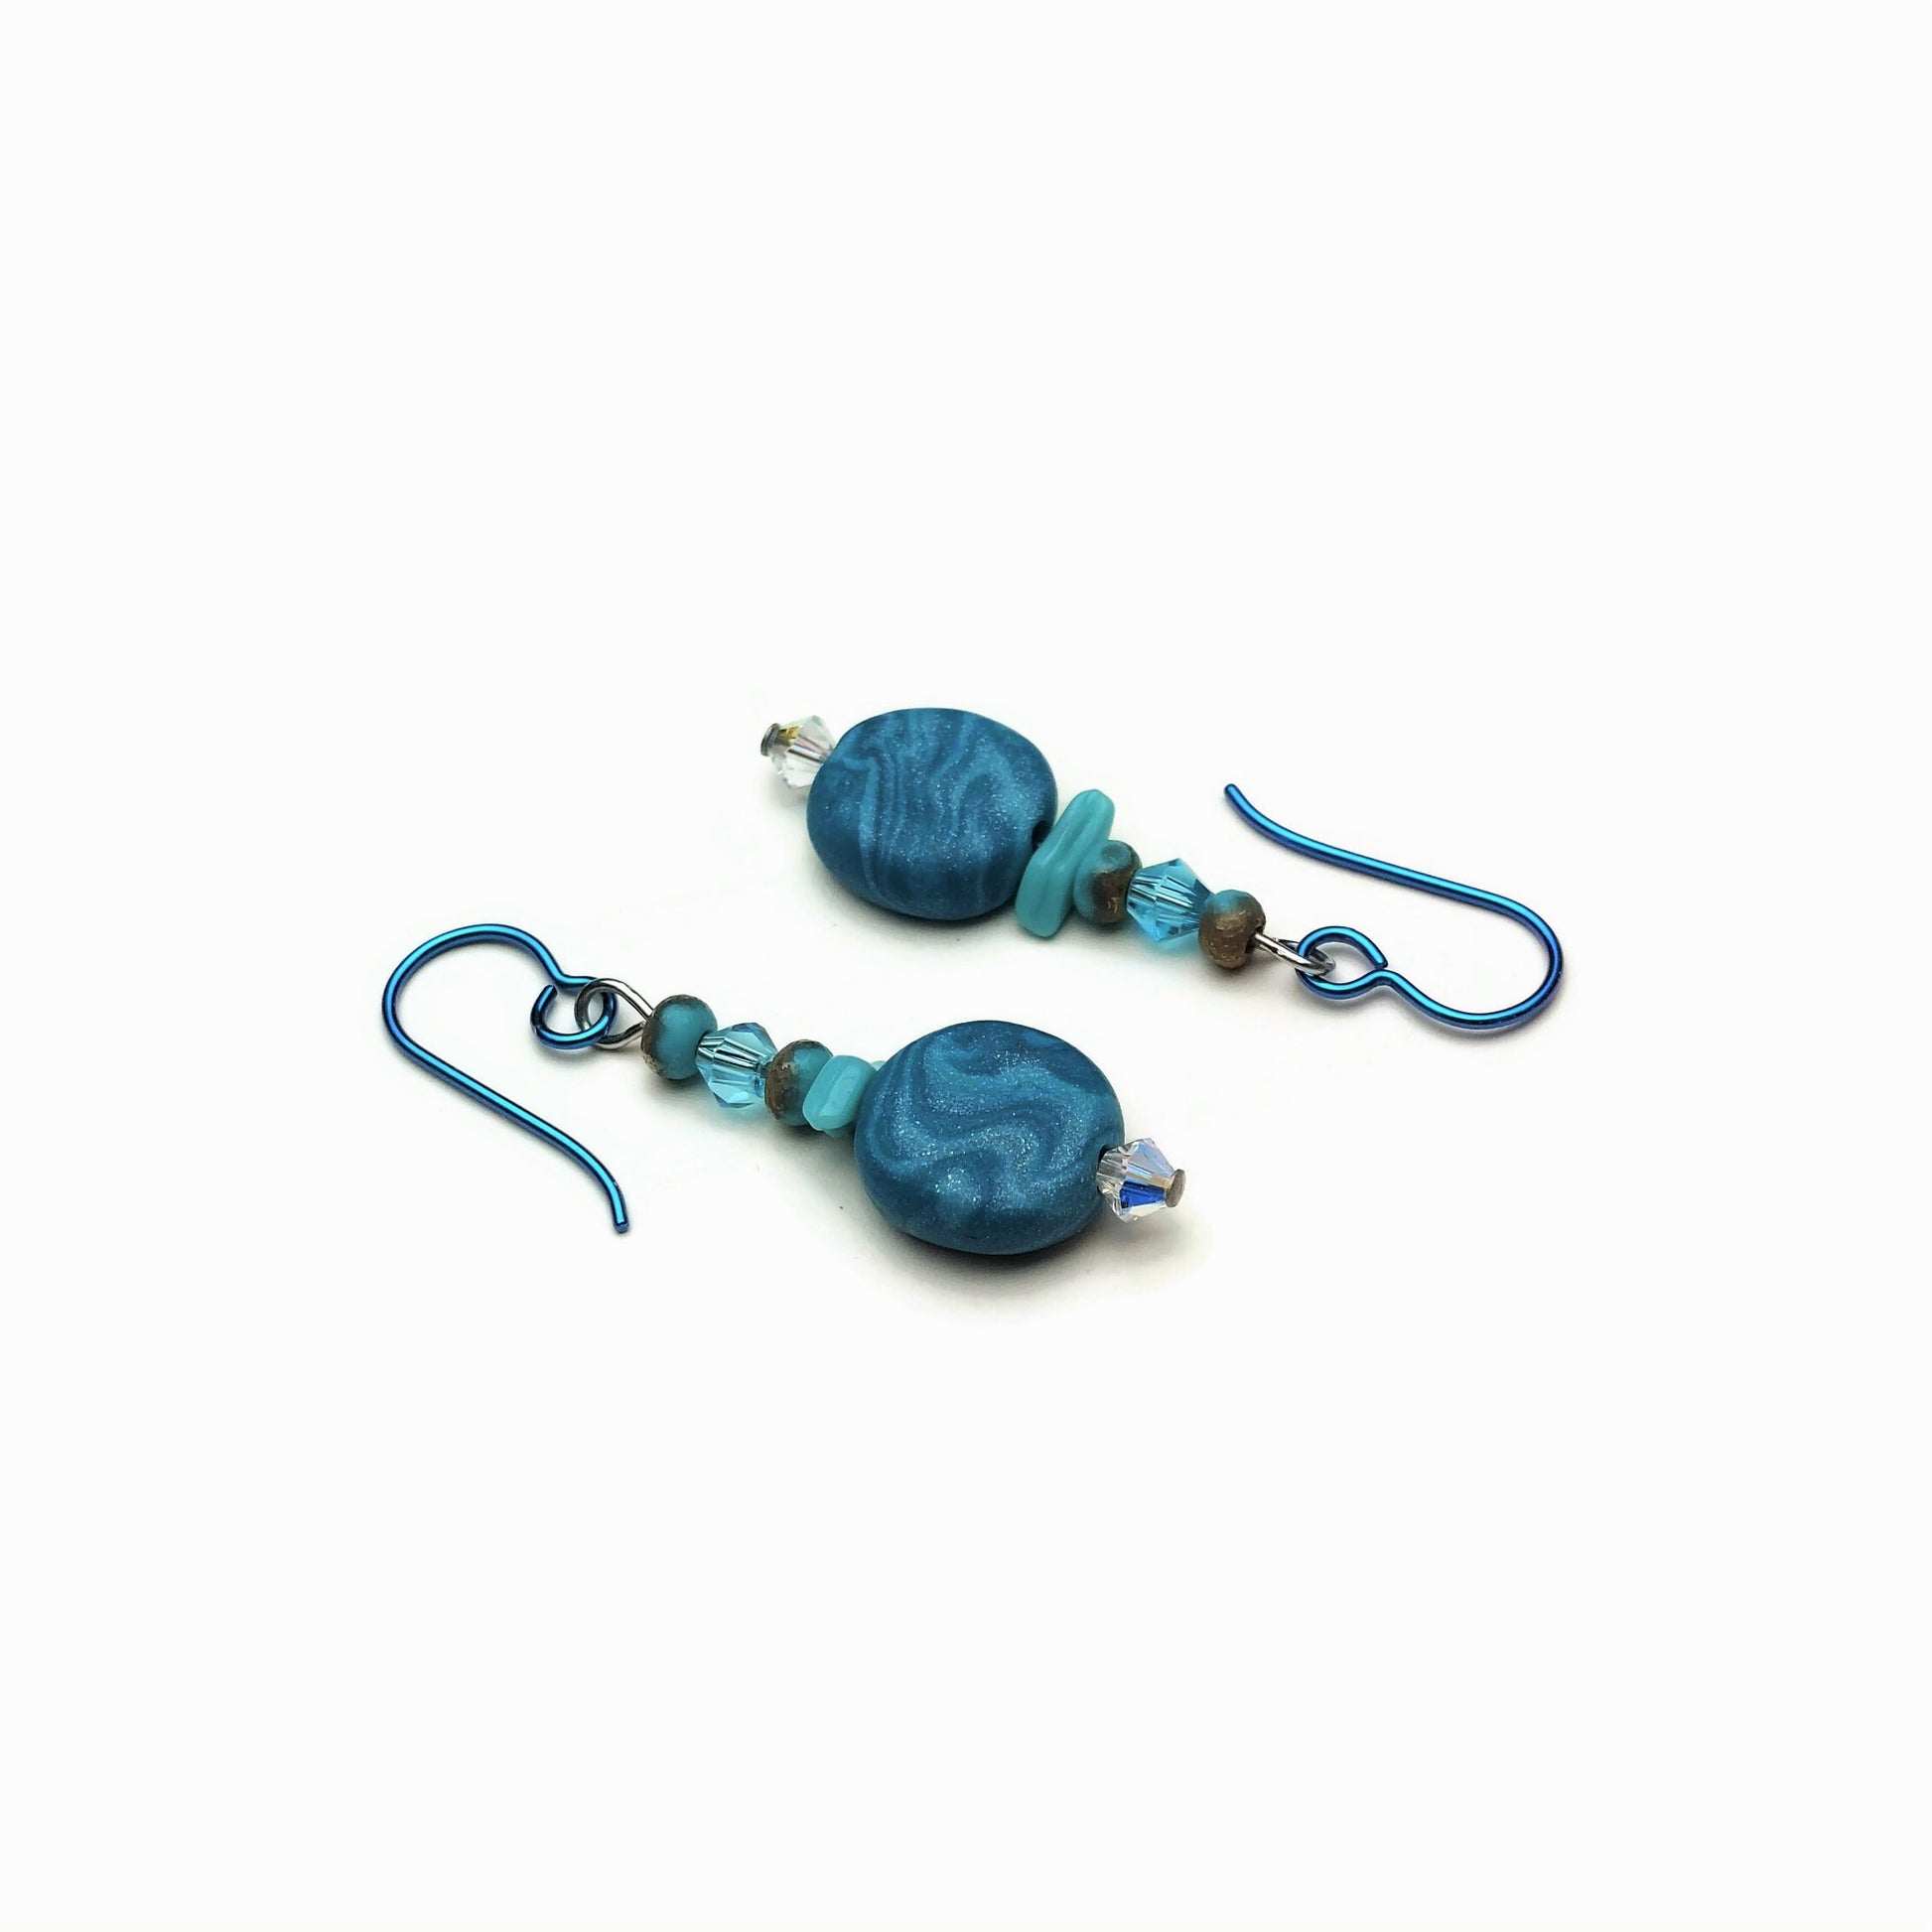 Polymer clay disk bead and crystal drop earrings with teal niobium ear wires on white background